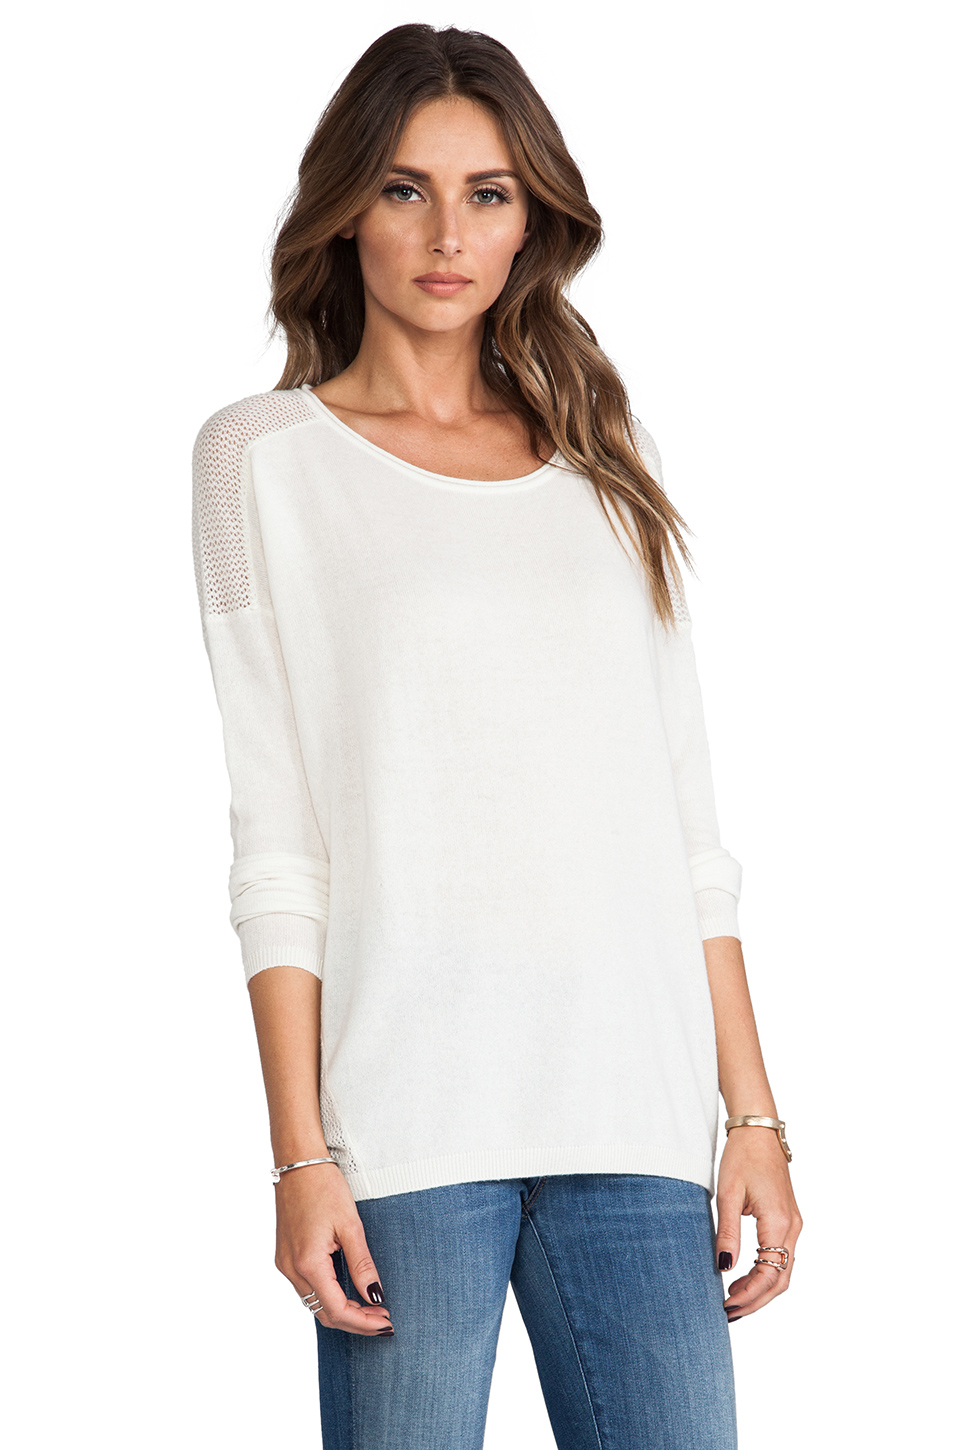 Lyst - Vince Cashmere Sweater in White